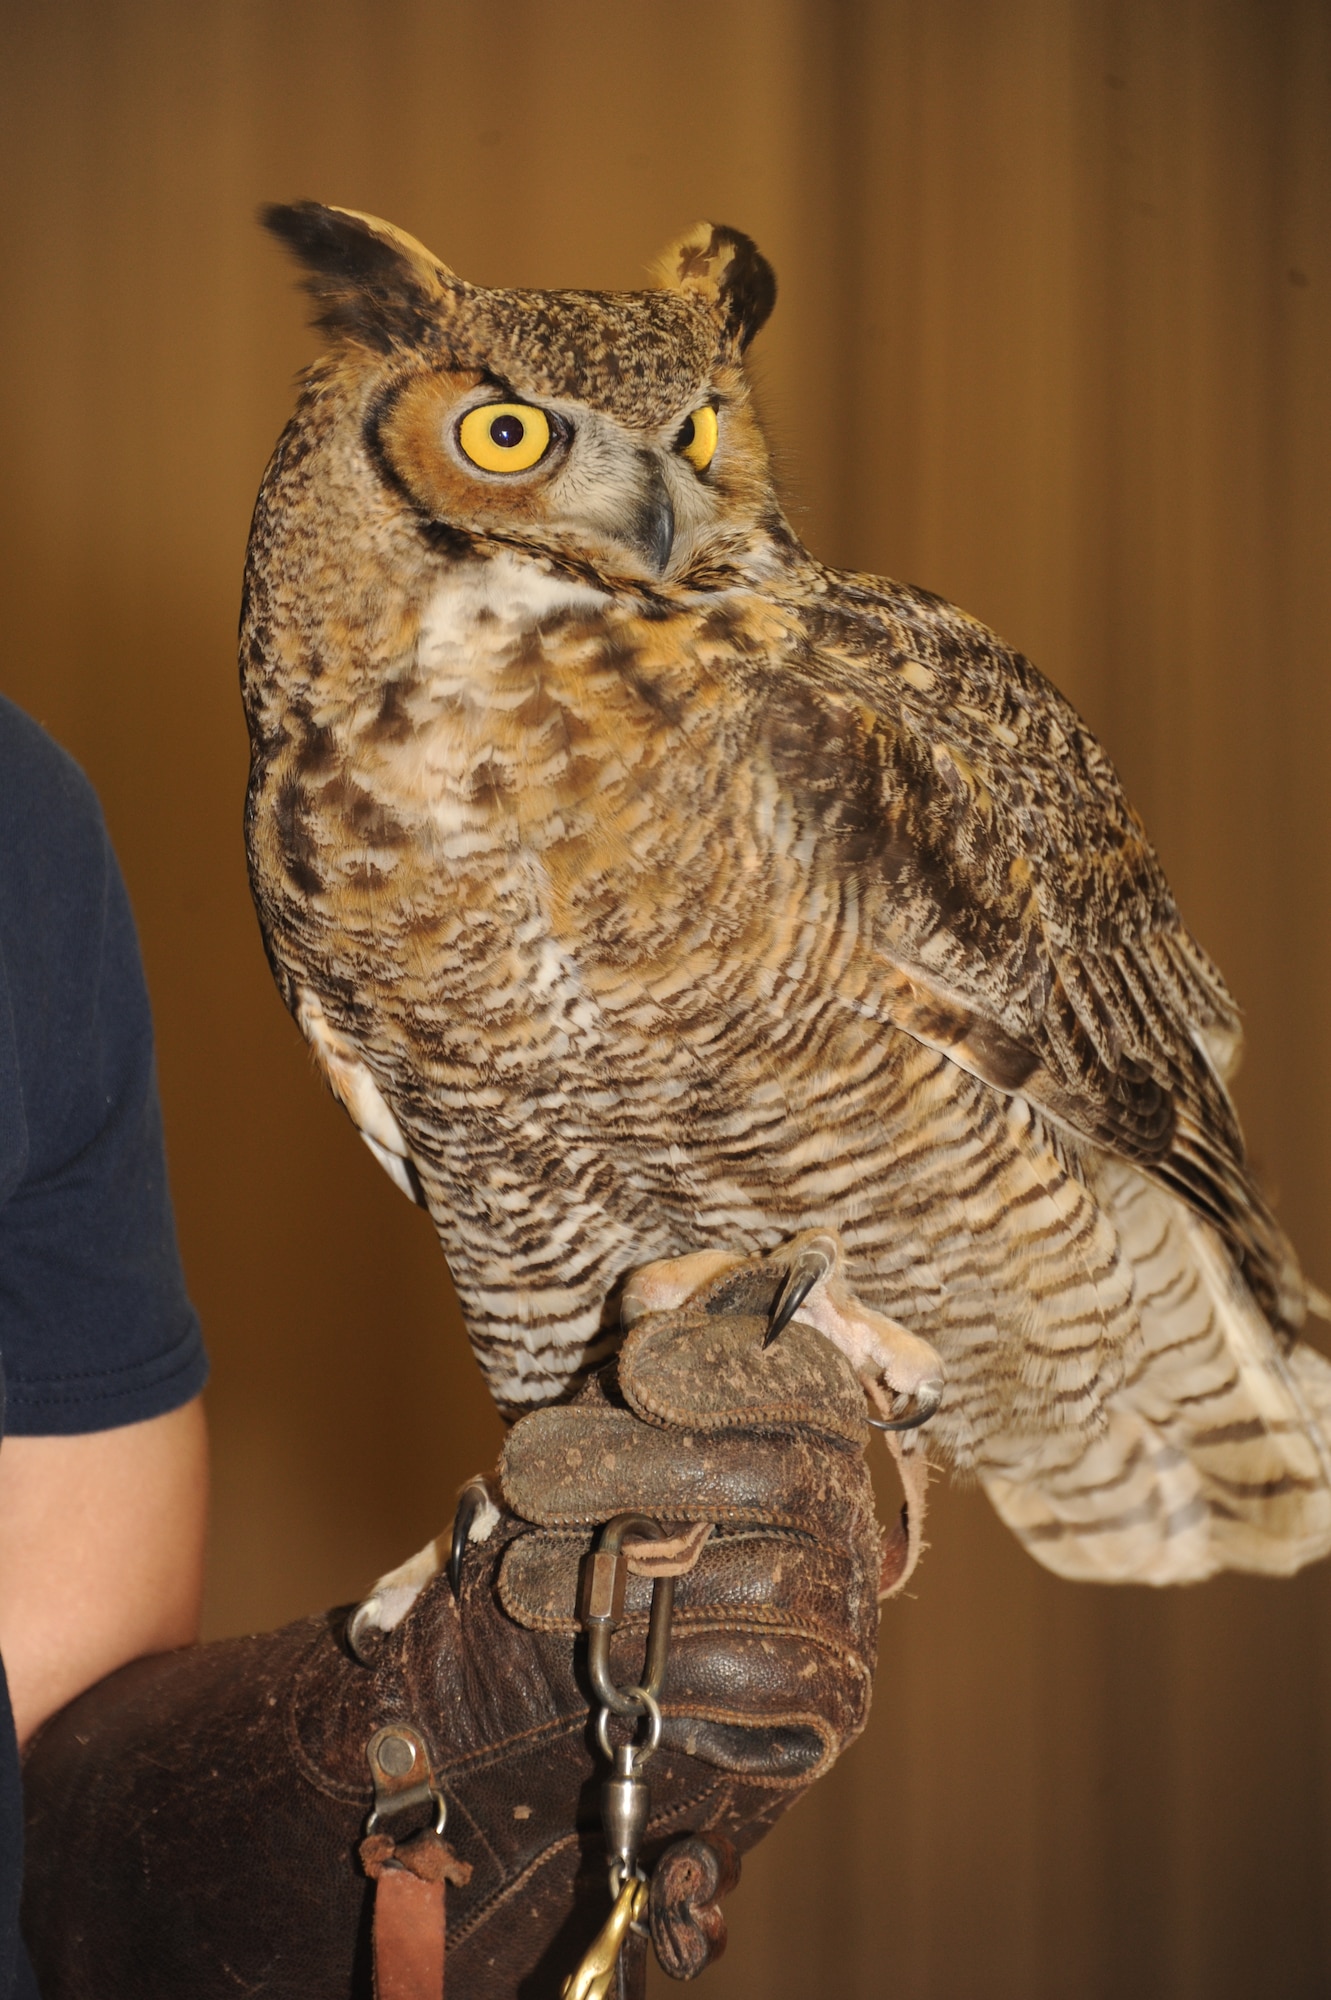 Catalina, the Great Horned Owl, rests on the hand of her handler, Alejandra Palacio, Alabama 4-H Science School educational instructor, during the Birds of Prey demonstration April 8, 2016, at Maxwell Air Force Base, Alabama. The students received a close-up look of the birds, while also learning about their habitat. (U.S. Air Force photo by Airman 1st Class Alexa Culbert)